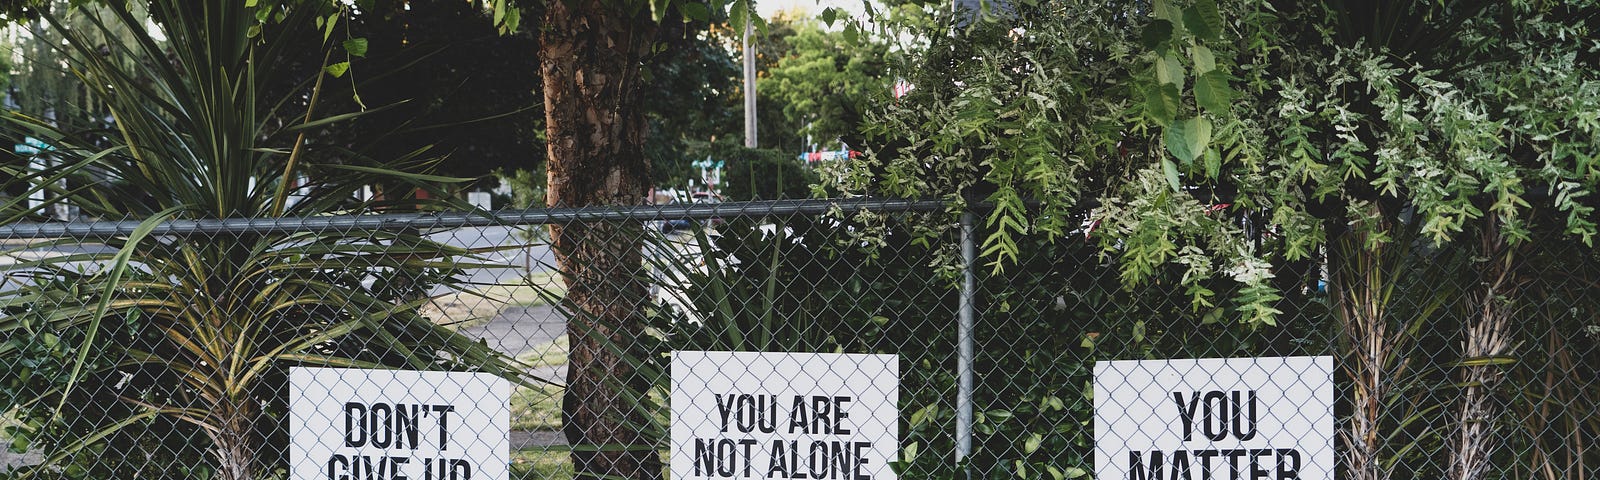 3 black + white signs on a wire fence: “don’t give up,” “you are not alone,” and “you matter” with trees in the background